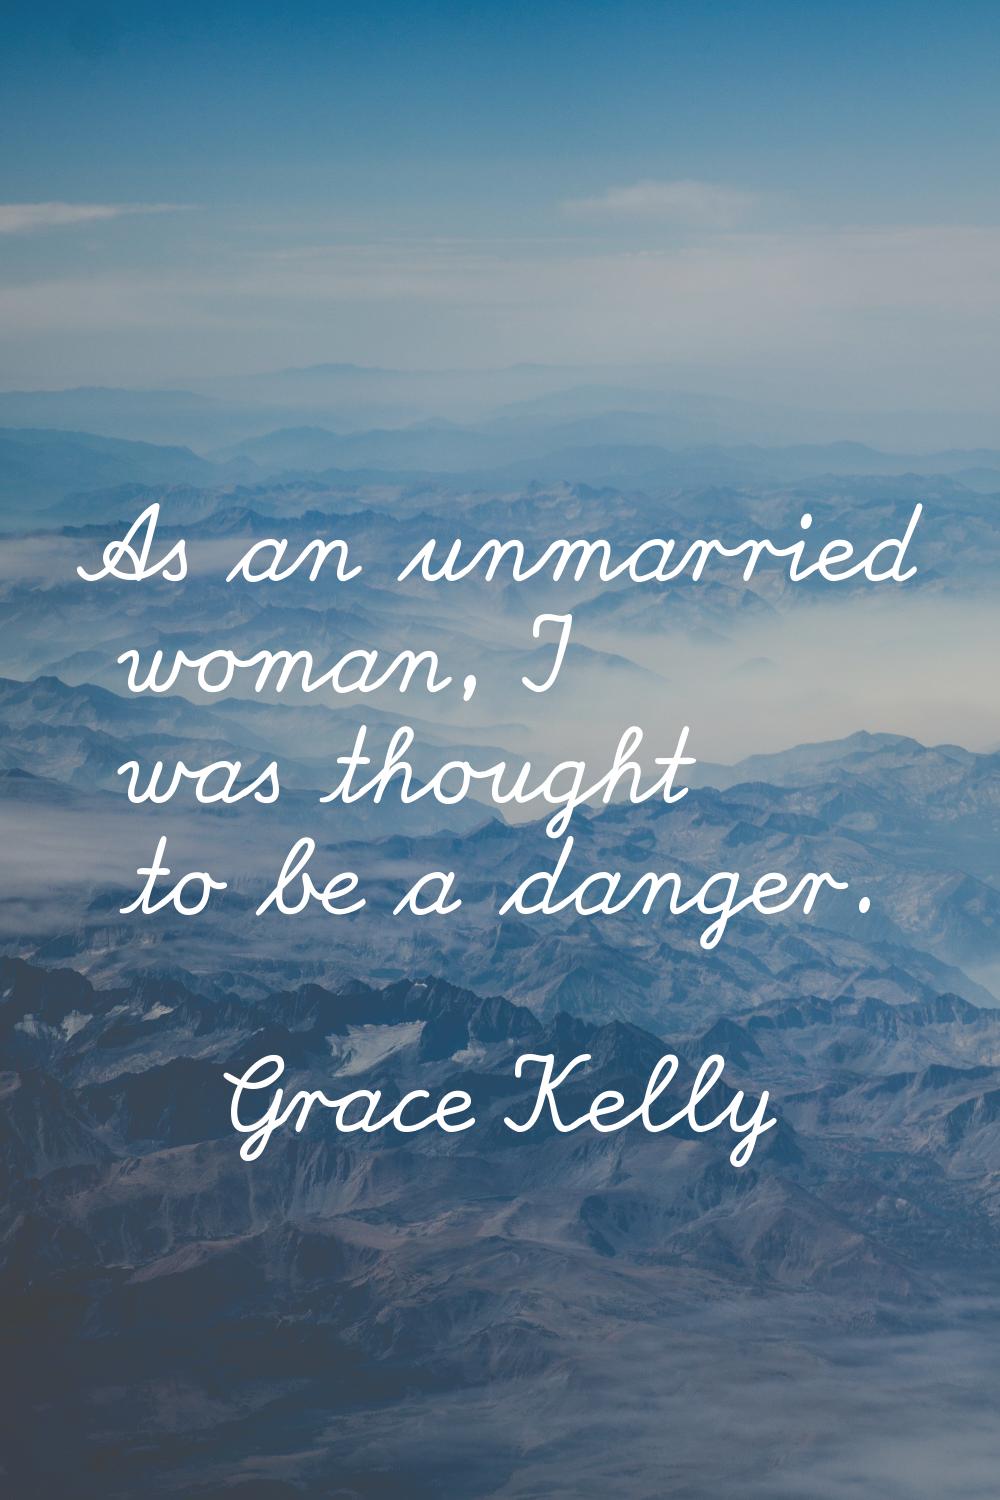 As an unmarried woman, I was thought to be a danger.